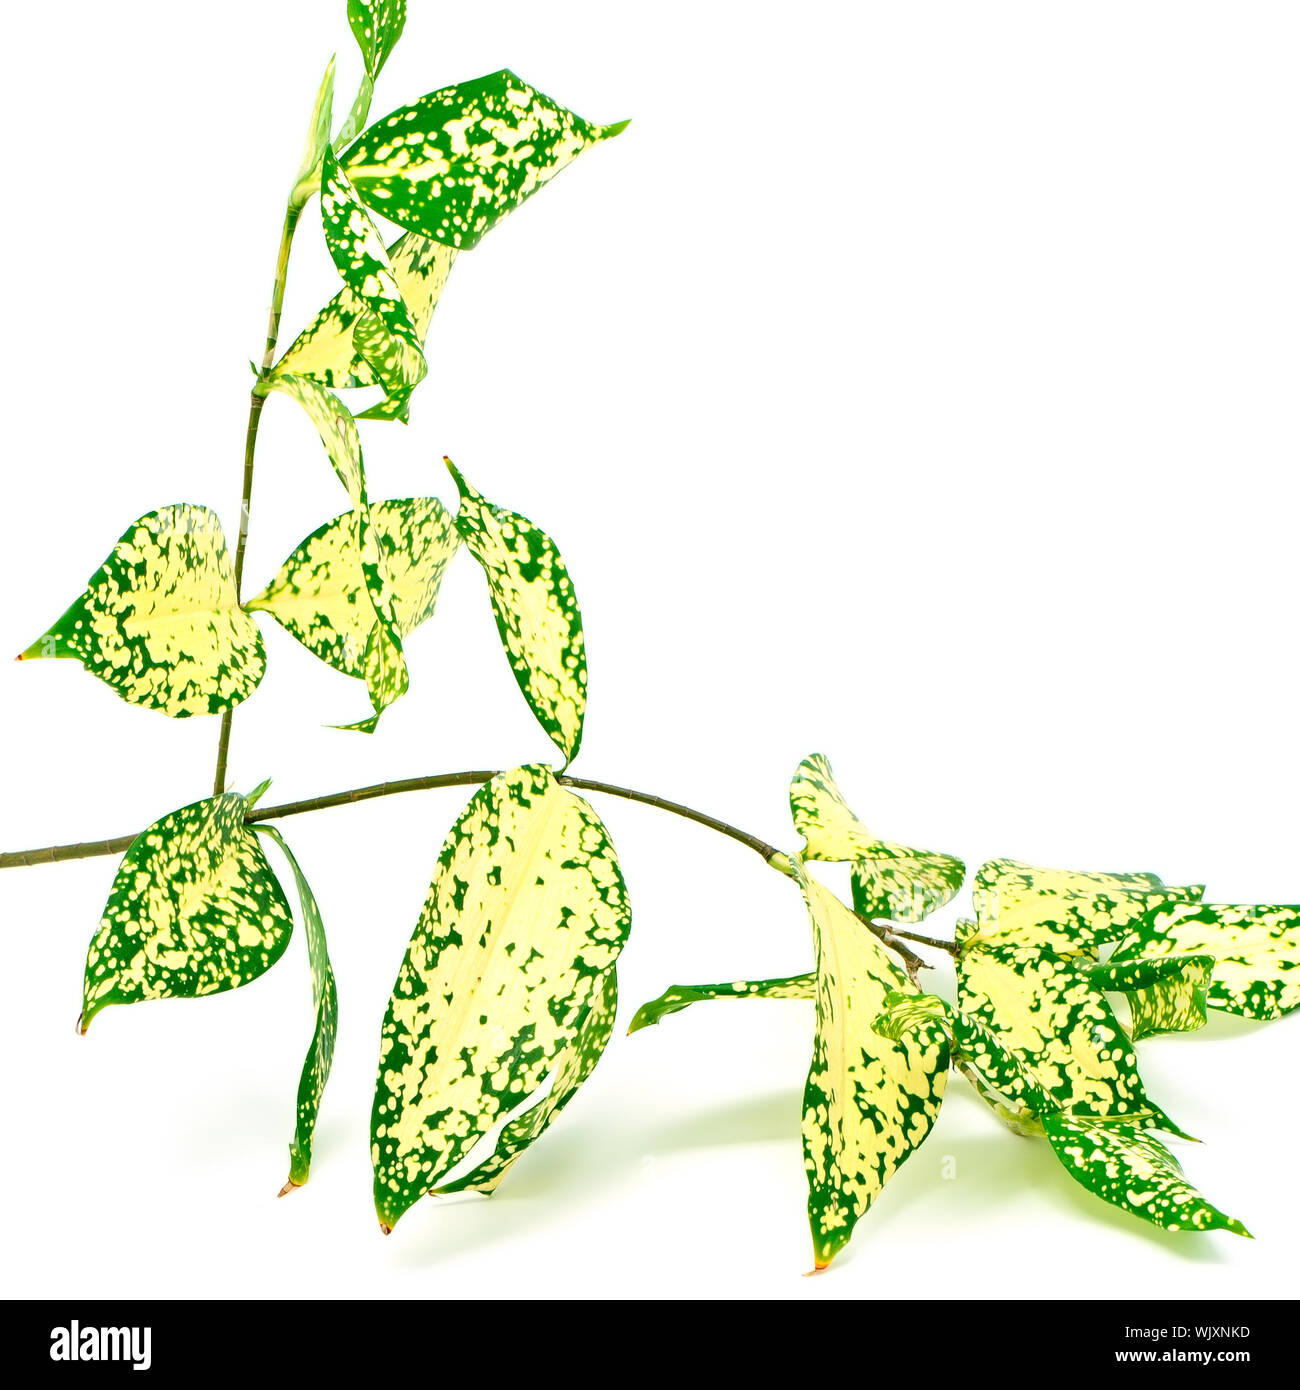 Foliage leaves of dracaena, Gold Dust dracaena or Spotted dracaena, spotted form, isolated on a white background Stock Photo